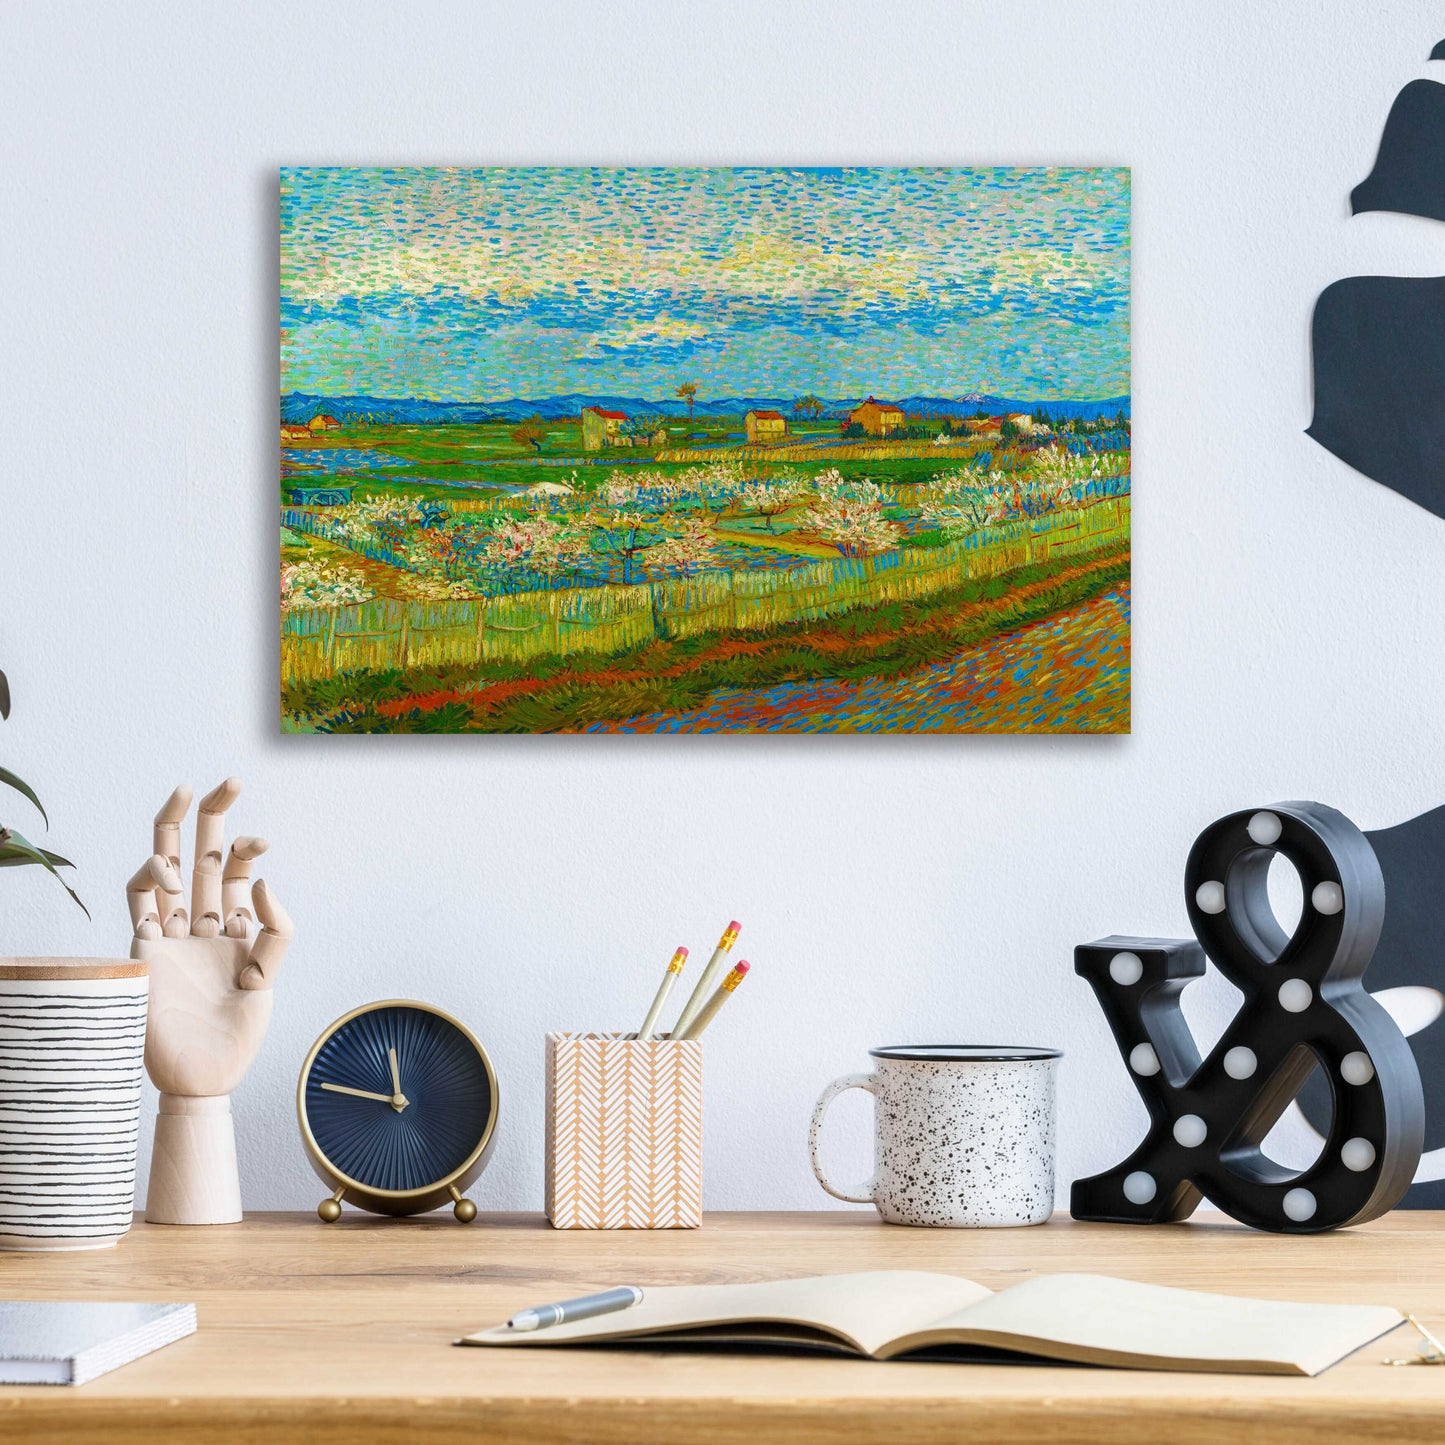 Epic Art 'Peach Trees In Blossom' by Vincent Van Gogh, Acrylic Glass Wall Art,16x12